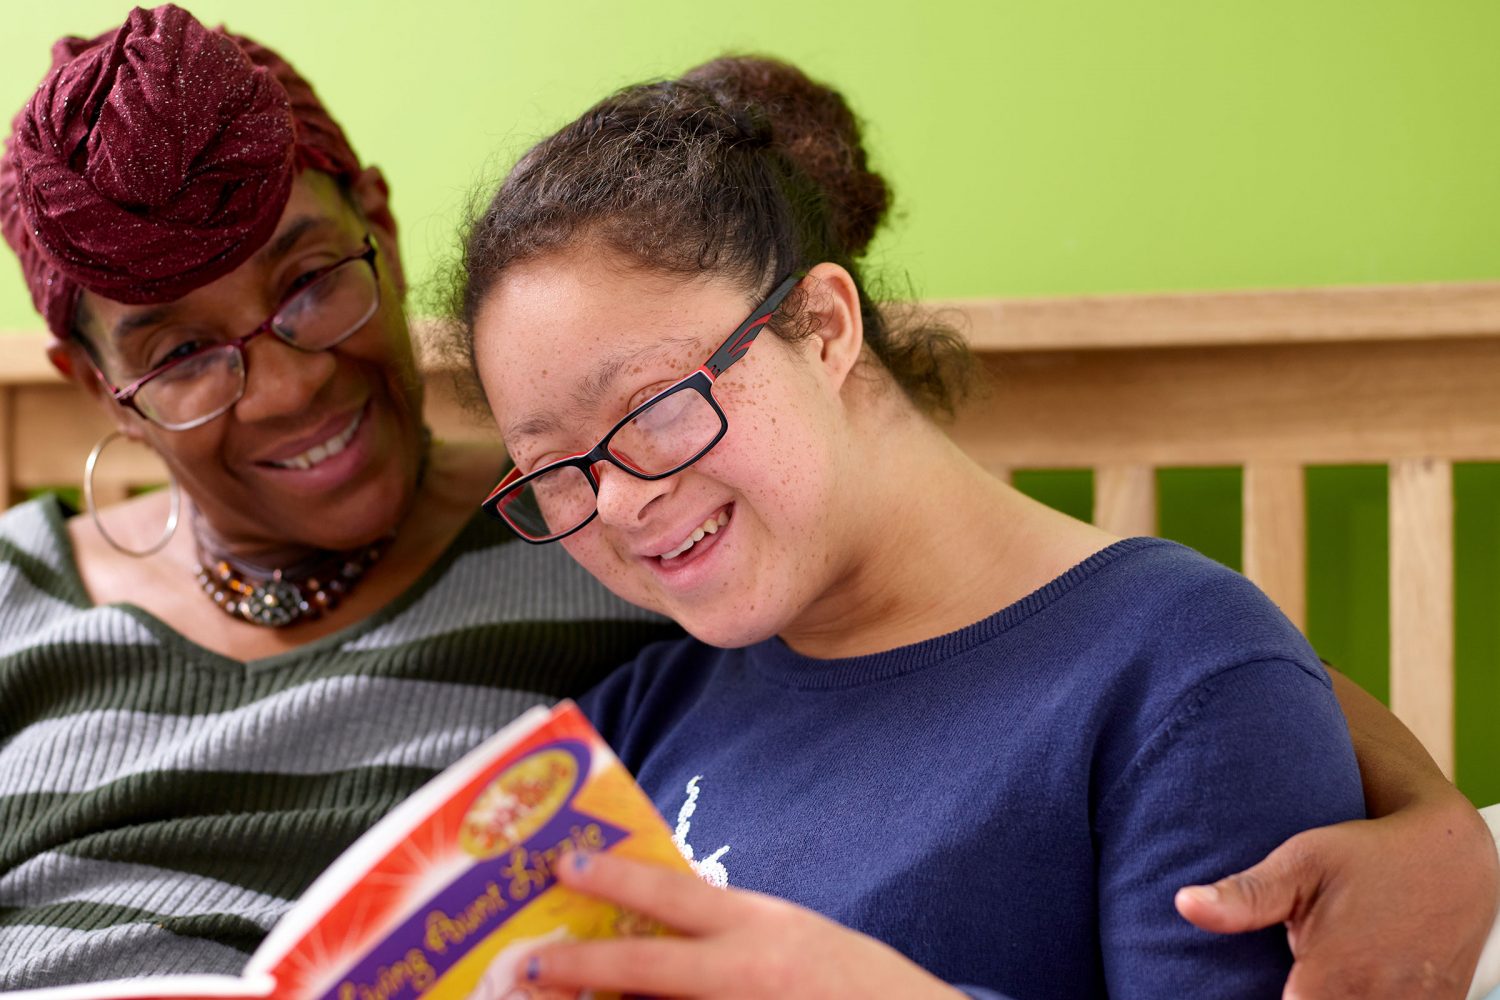 Teenage girl with Down syndrome reads book with teacher